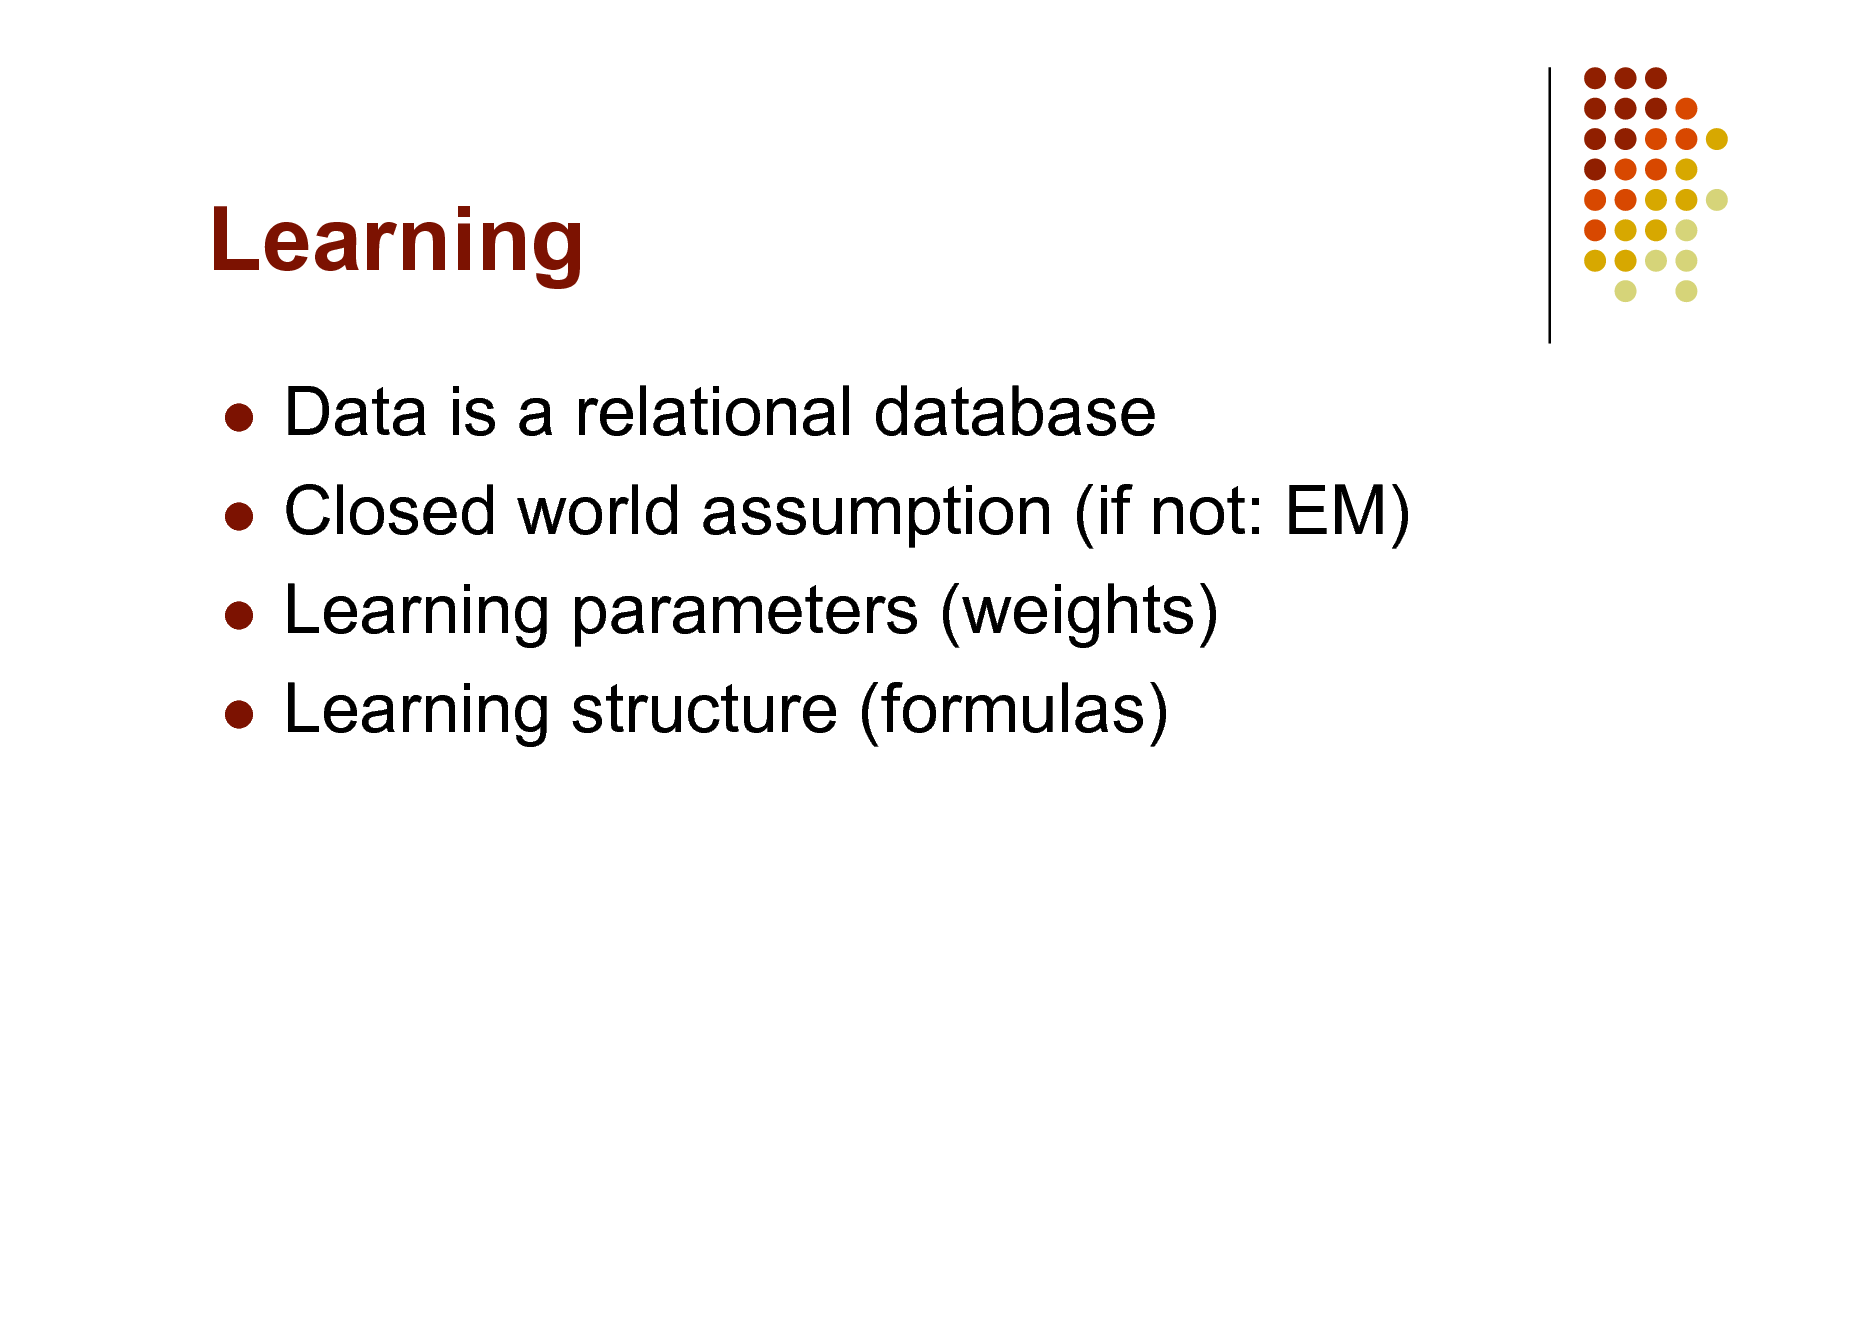 Slide: Learning
Data is a relational database  Closed world assumption (if not: EM)  Learning parameters (weights)  Learning structure (formulas)


